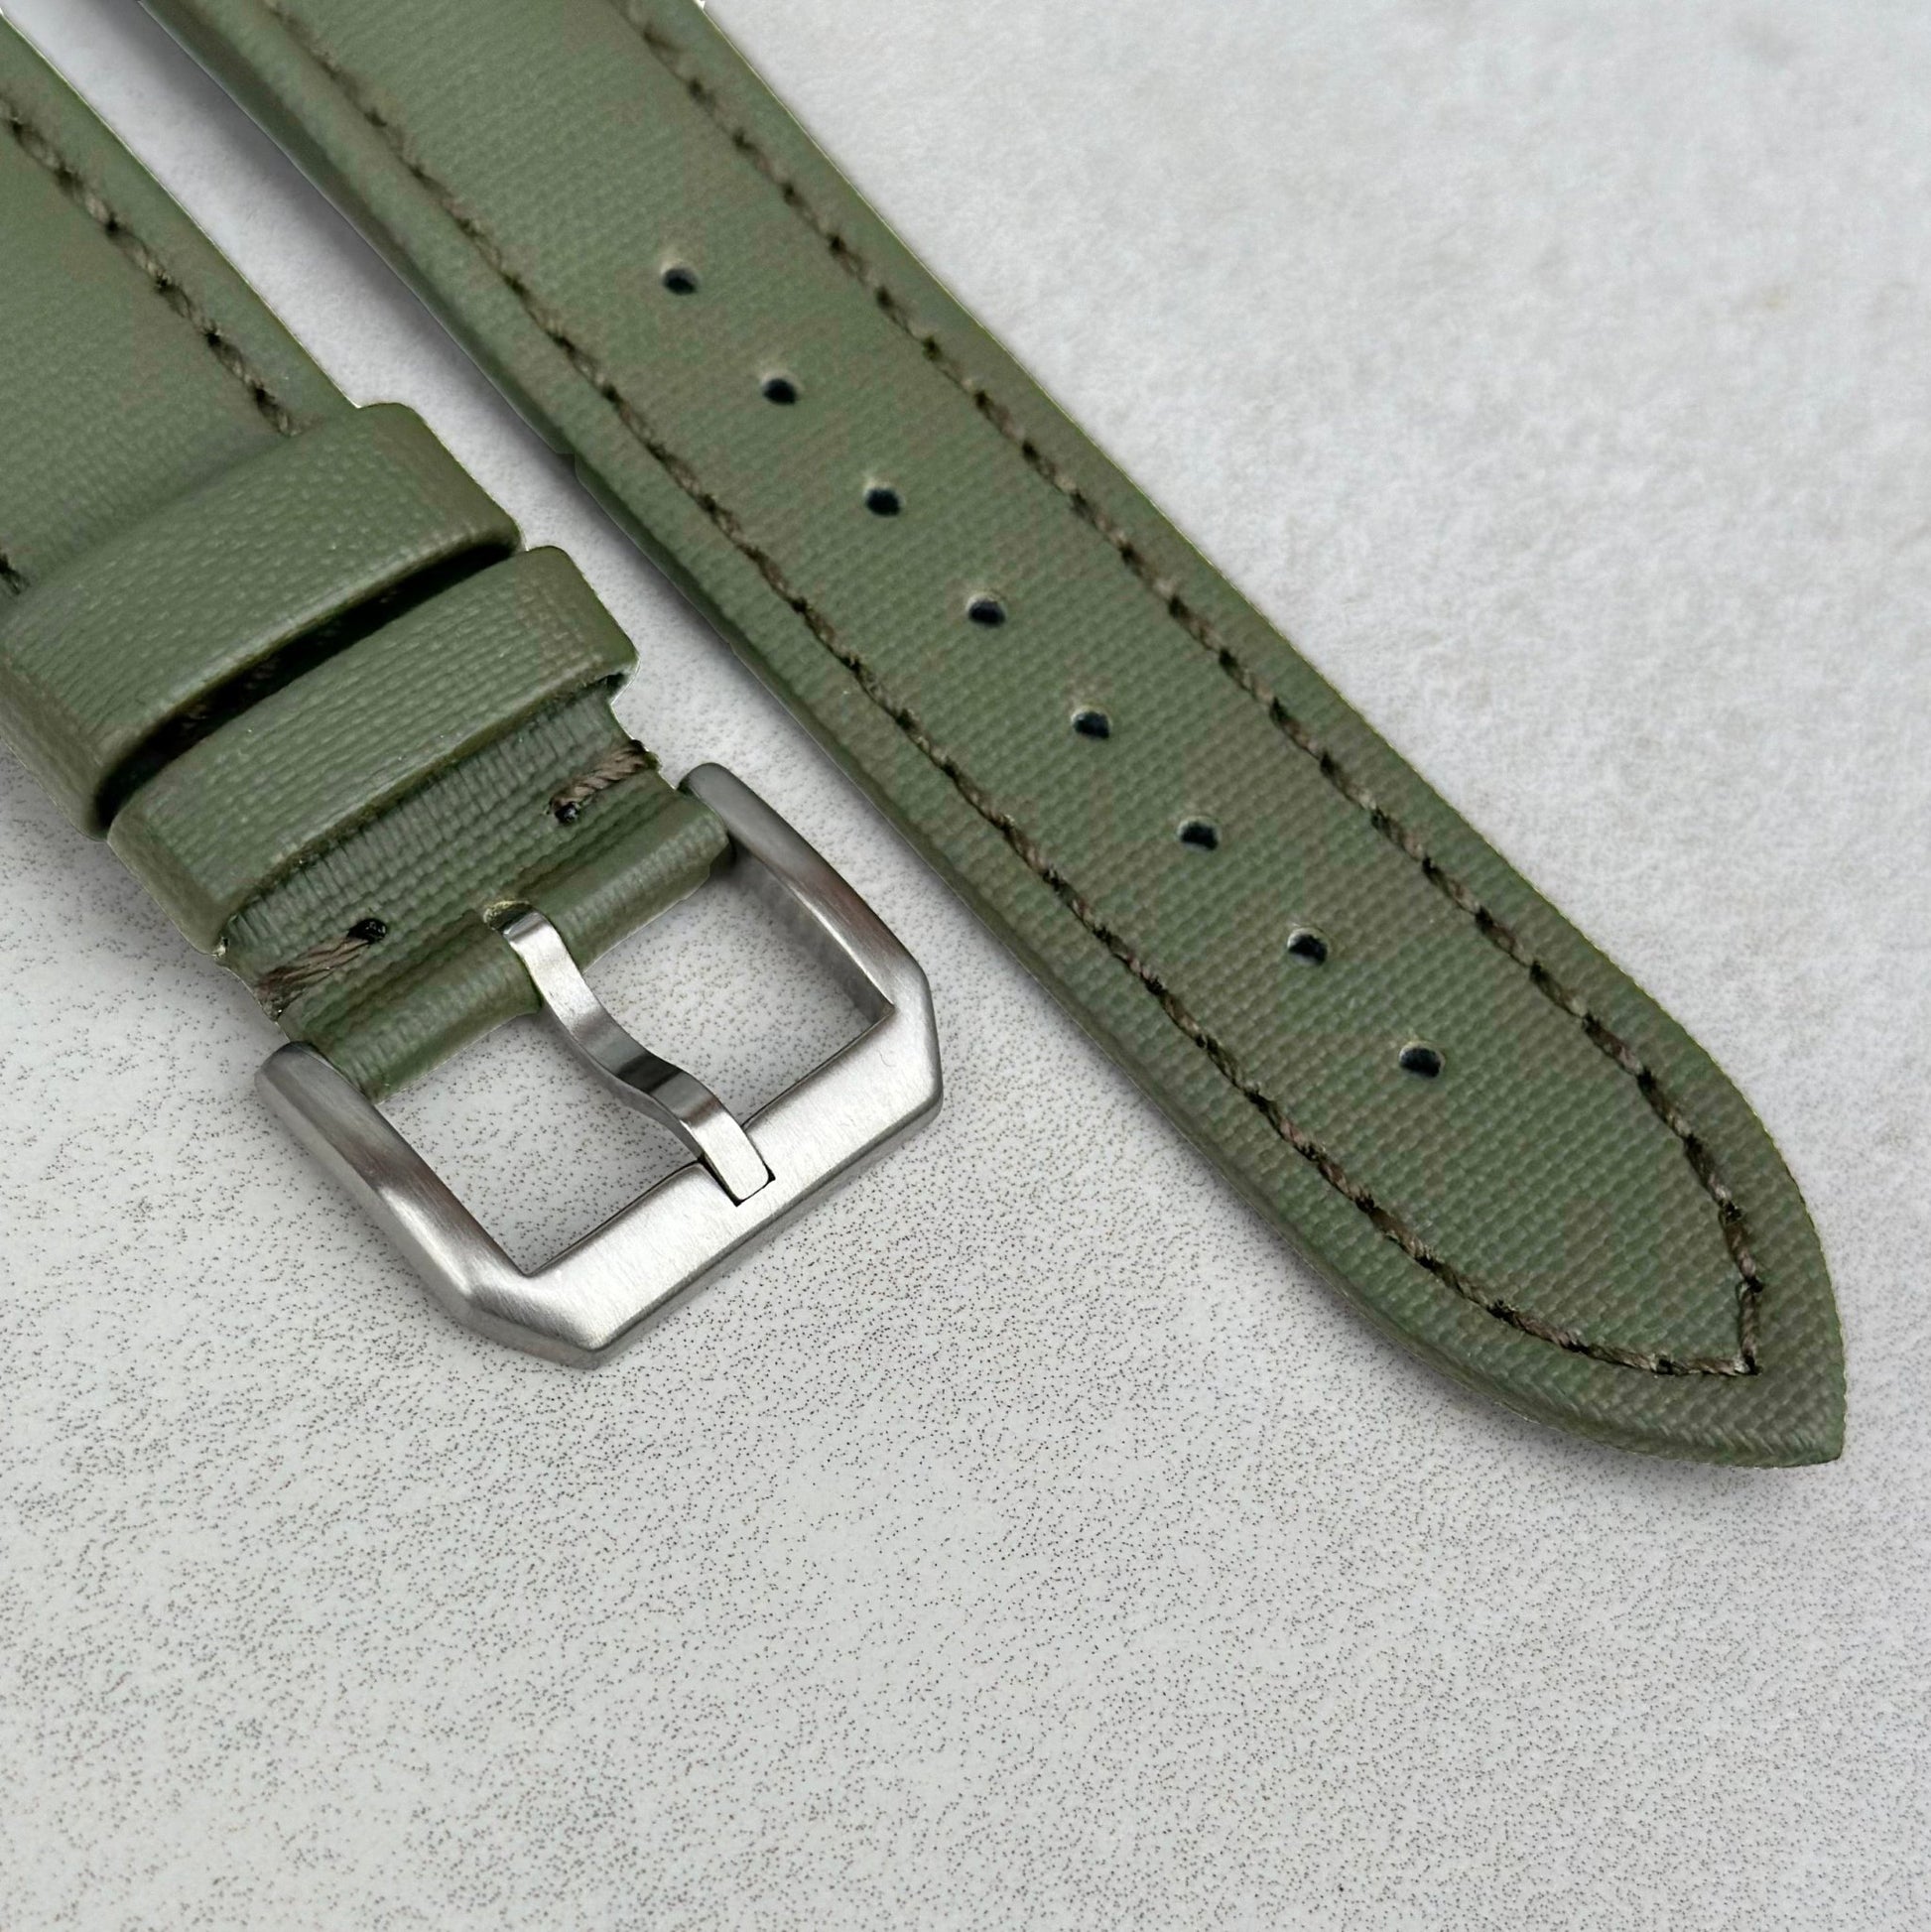 Brushed 316L stainless steel buckle on the Bermuda khaki green sail cloth watch strap. Watch And Strap